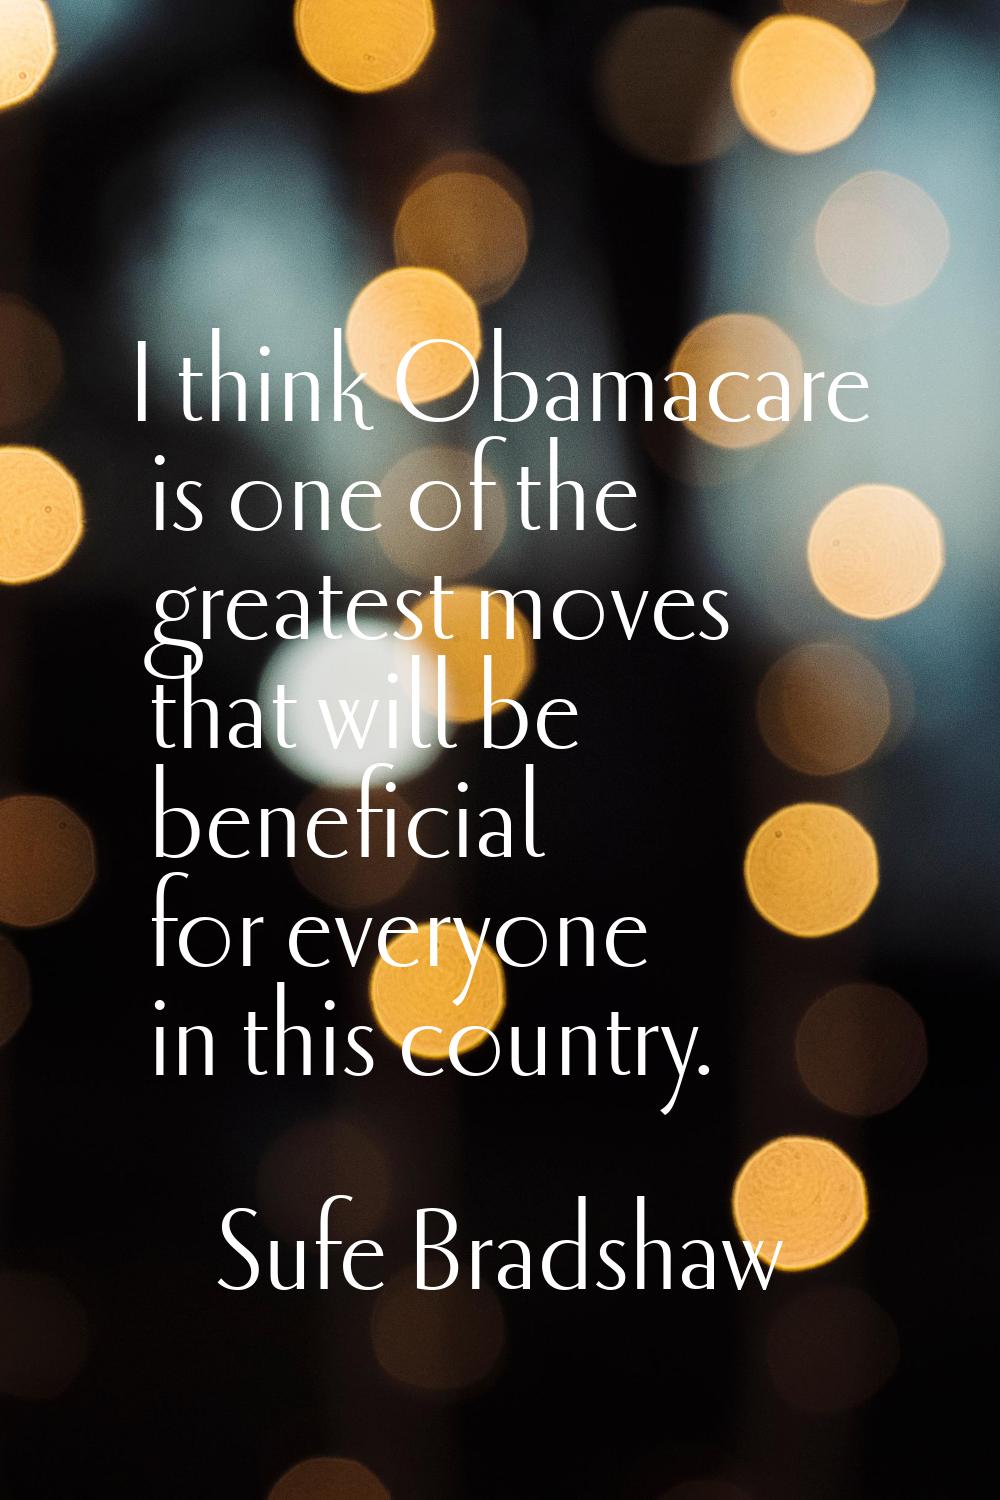 I think Obamacare is one of the greatest moves that will be beneficial for everyone in this country